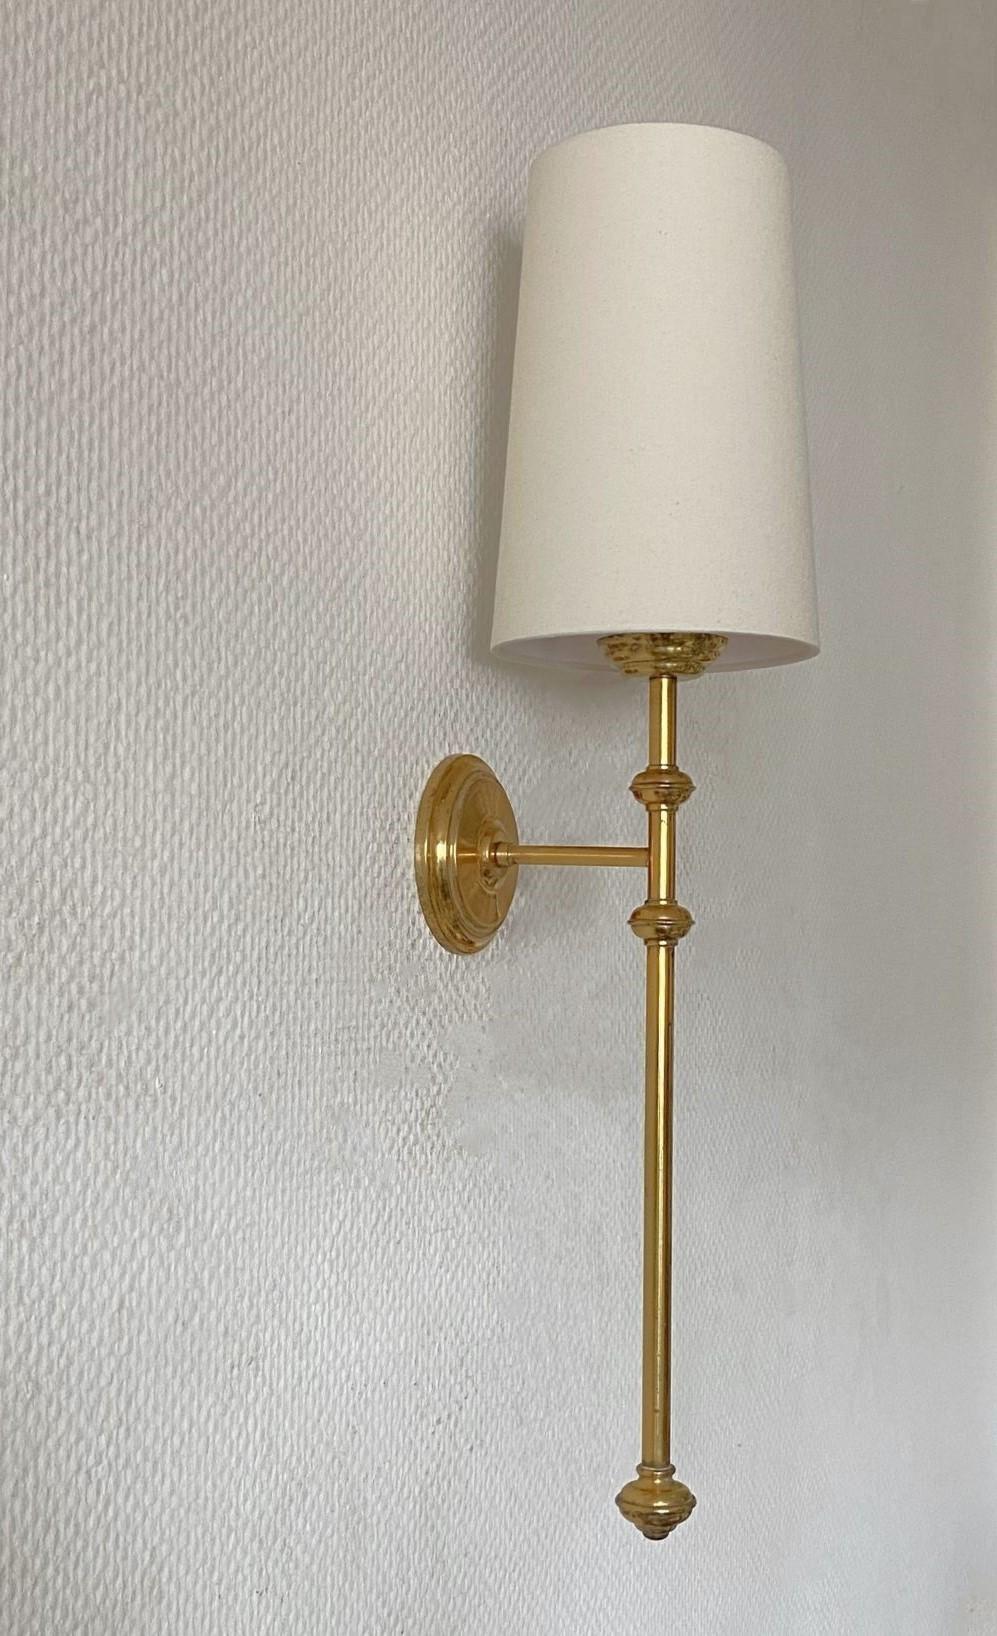 20th Century Pair of French Maison Jansen Style Brass Wall Sconces, Wall Lights